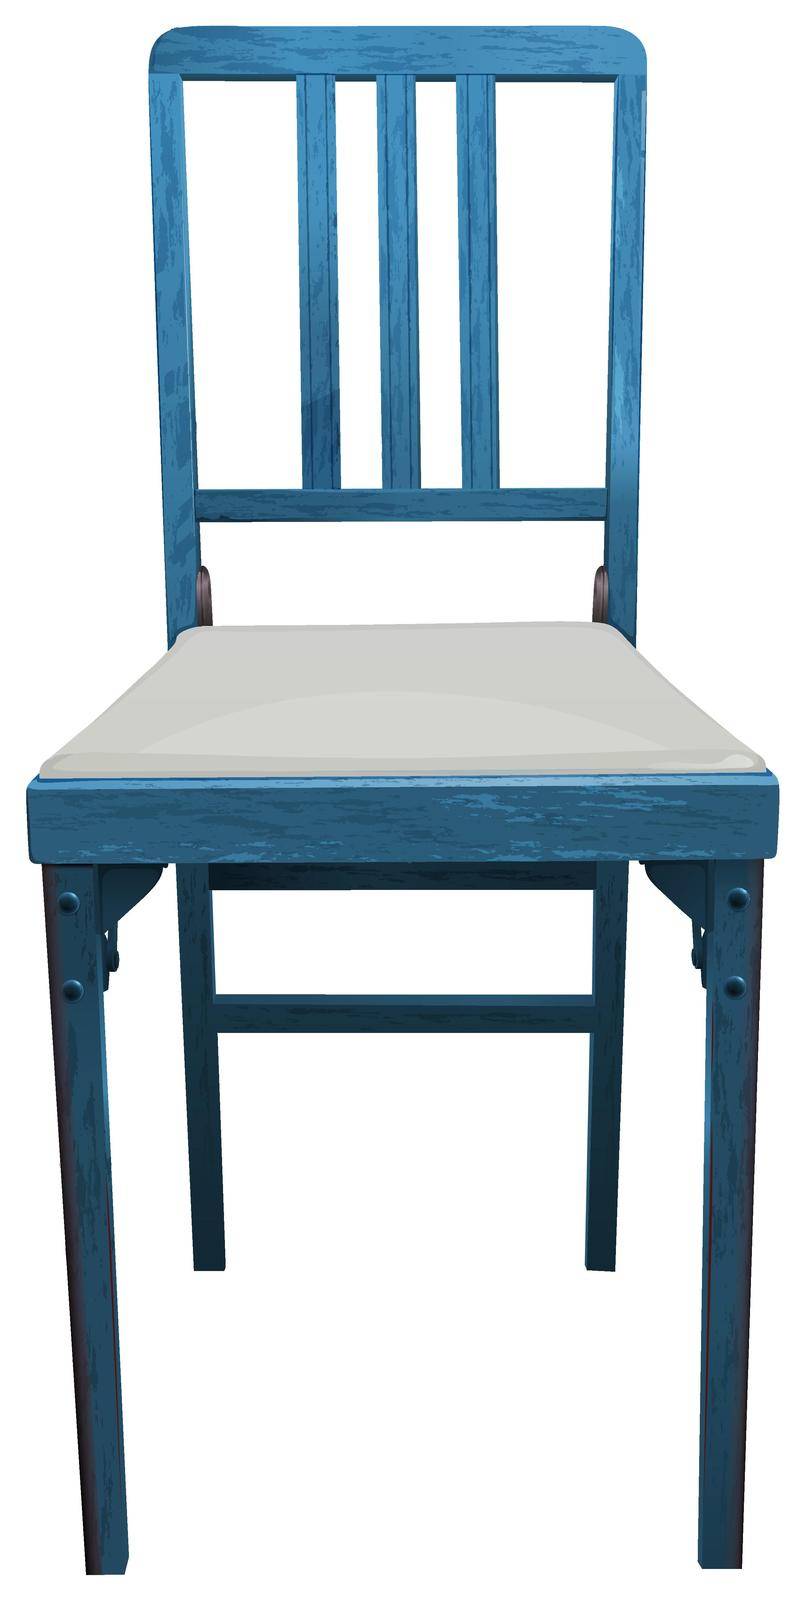 Illustration of a close up blue chair